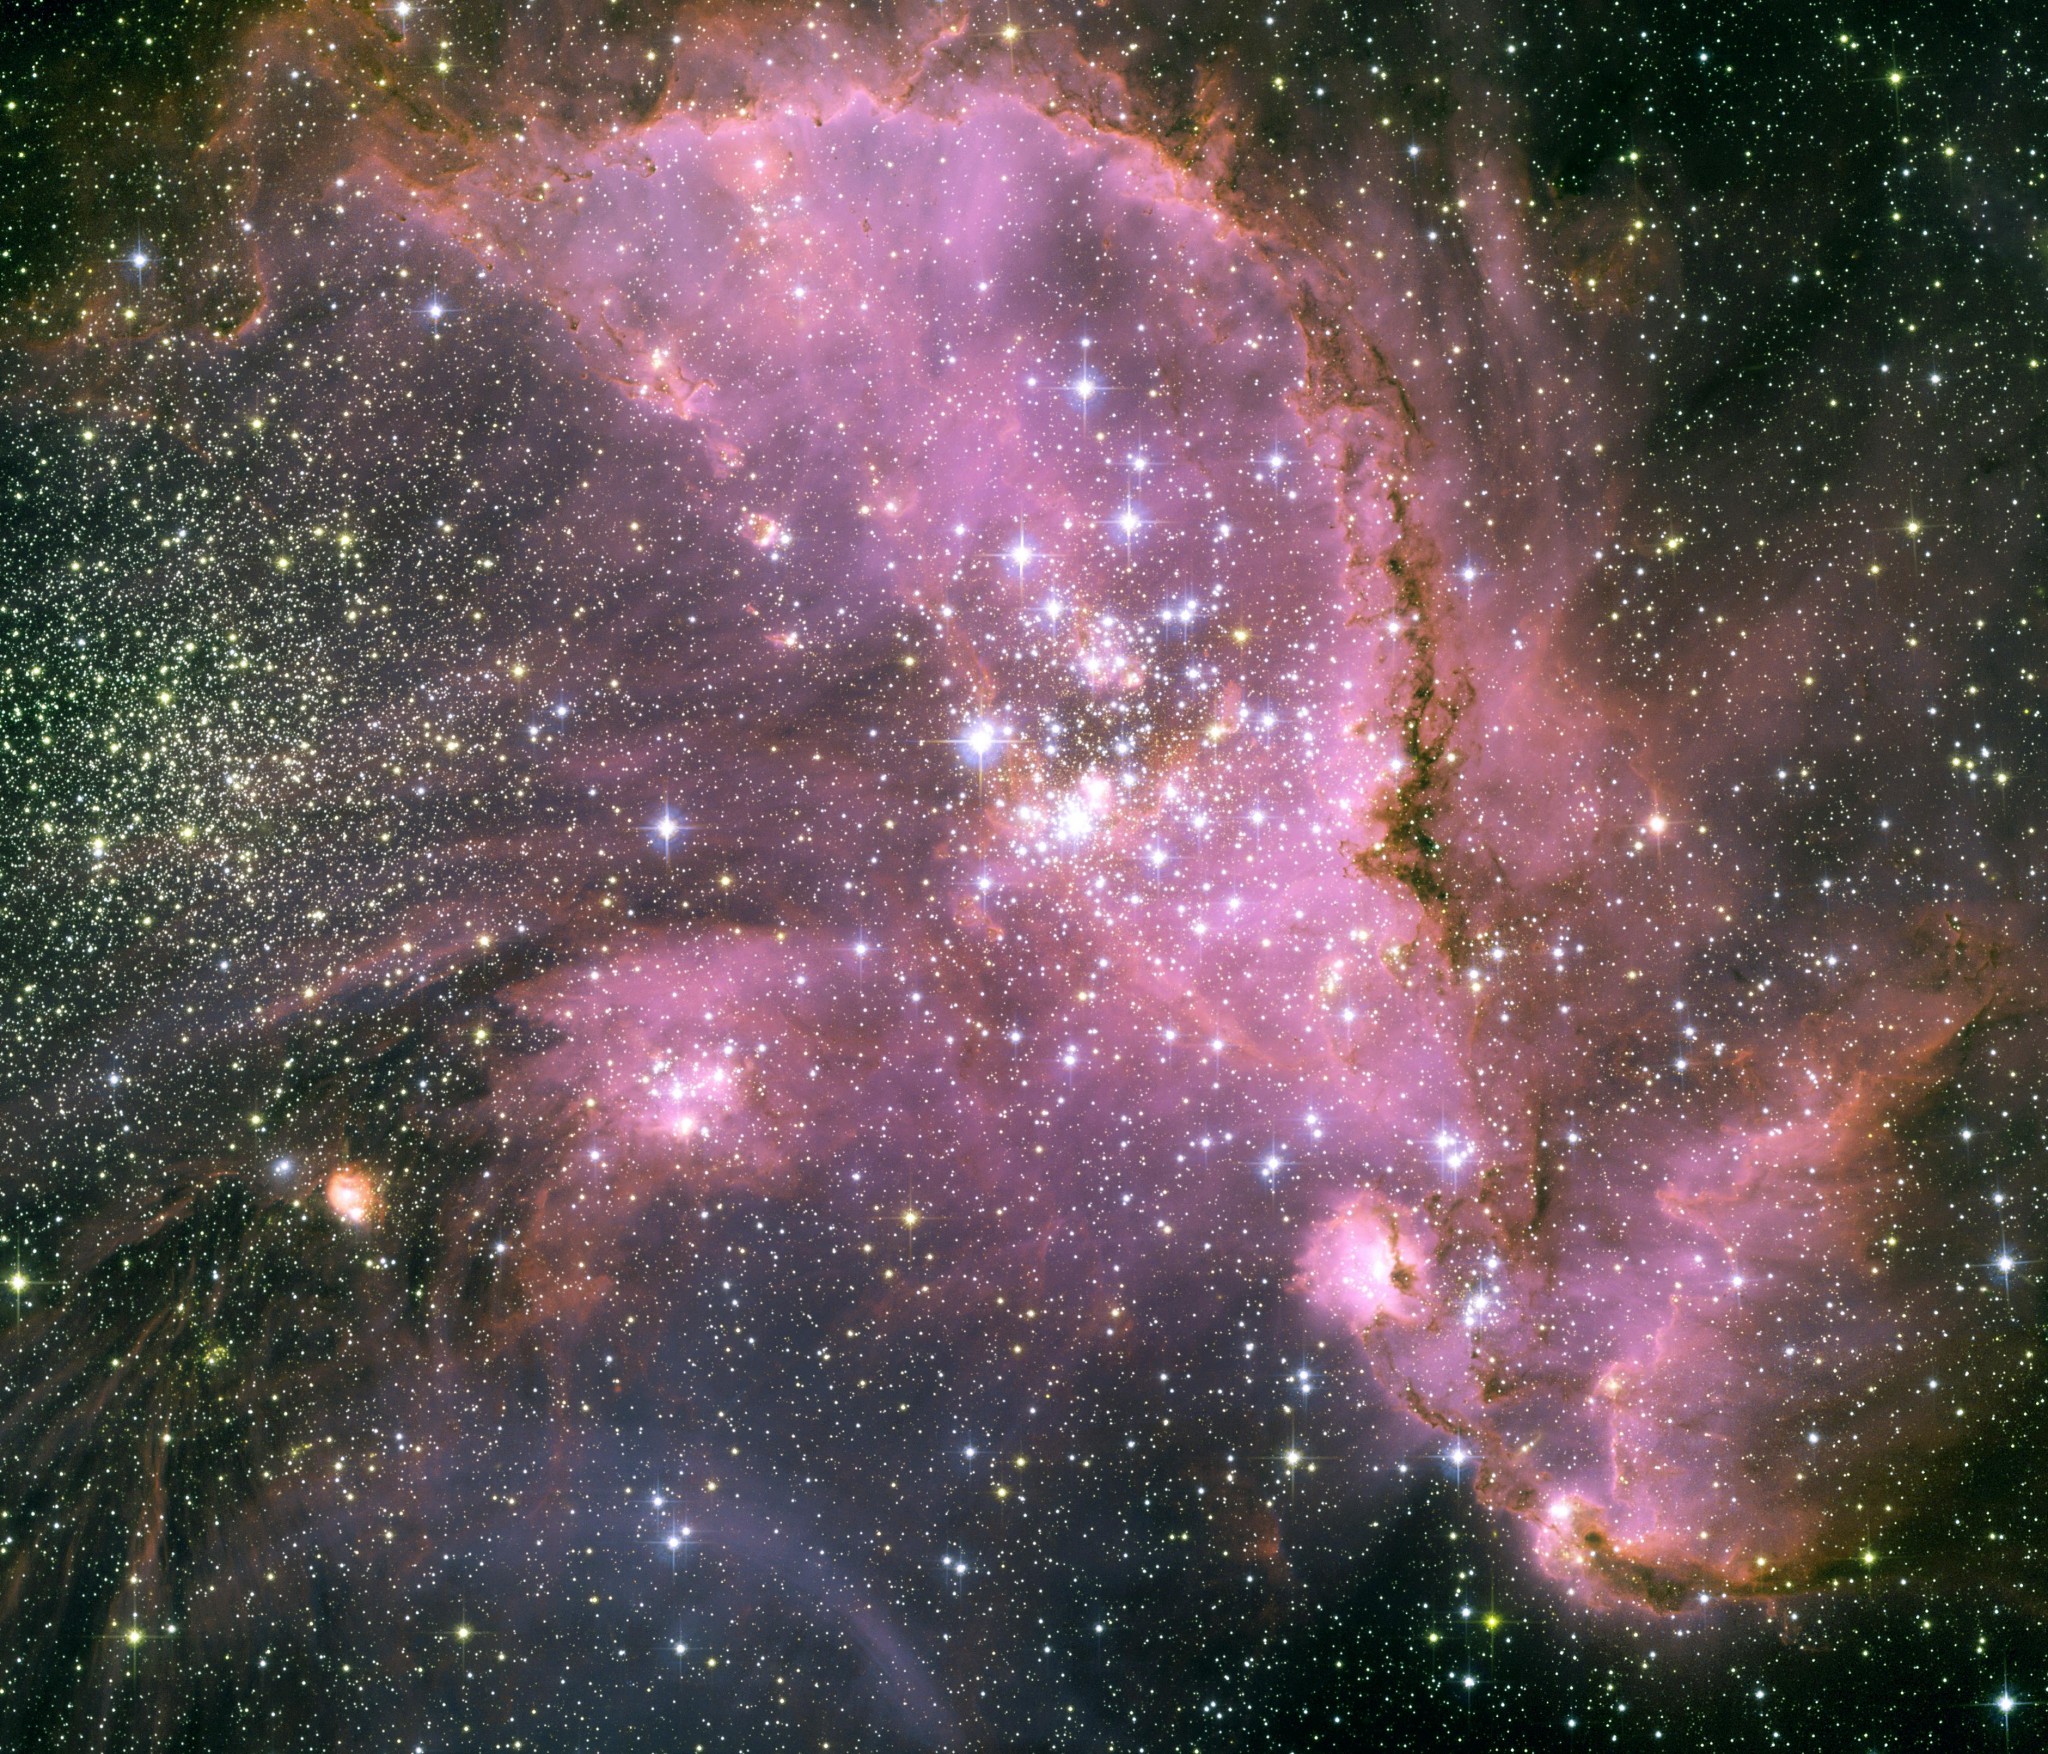 Hubble Space Telescope image of star-forming region N66 in the Small Magellanic Cloud